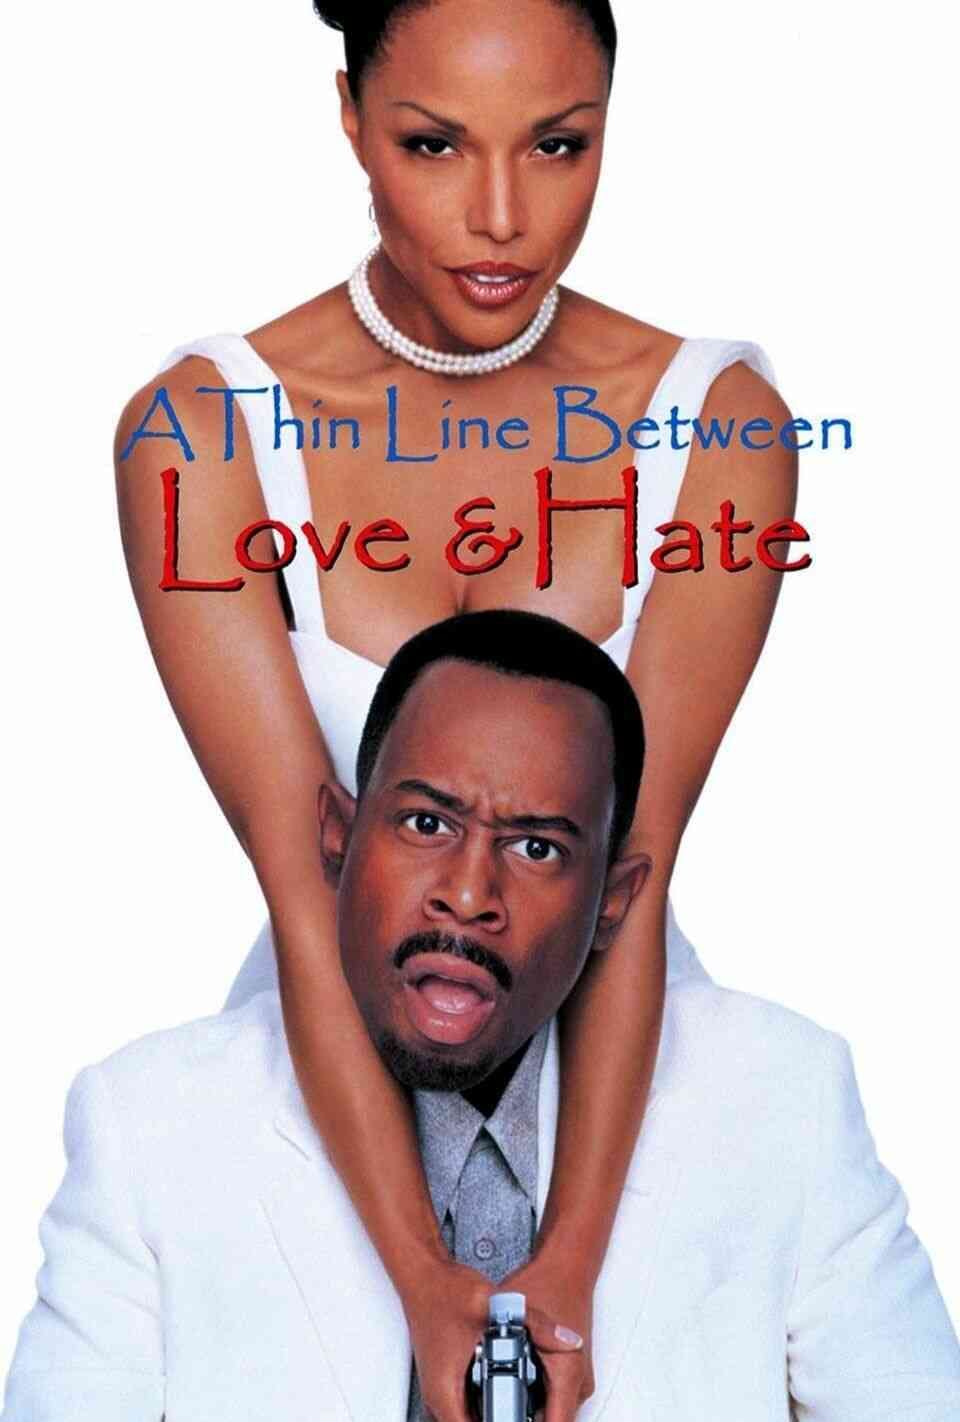 Read A Thin Line Between Love and Hate screenplay (poster)